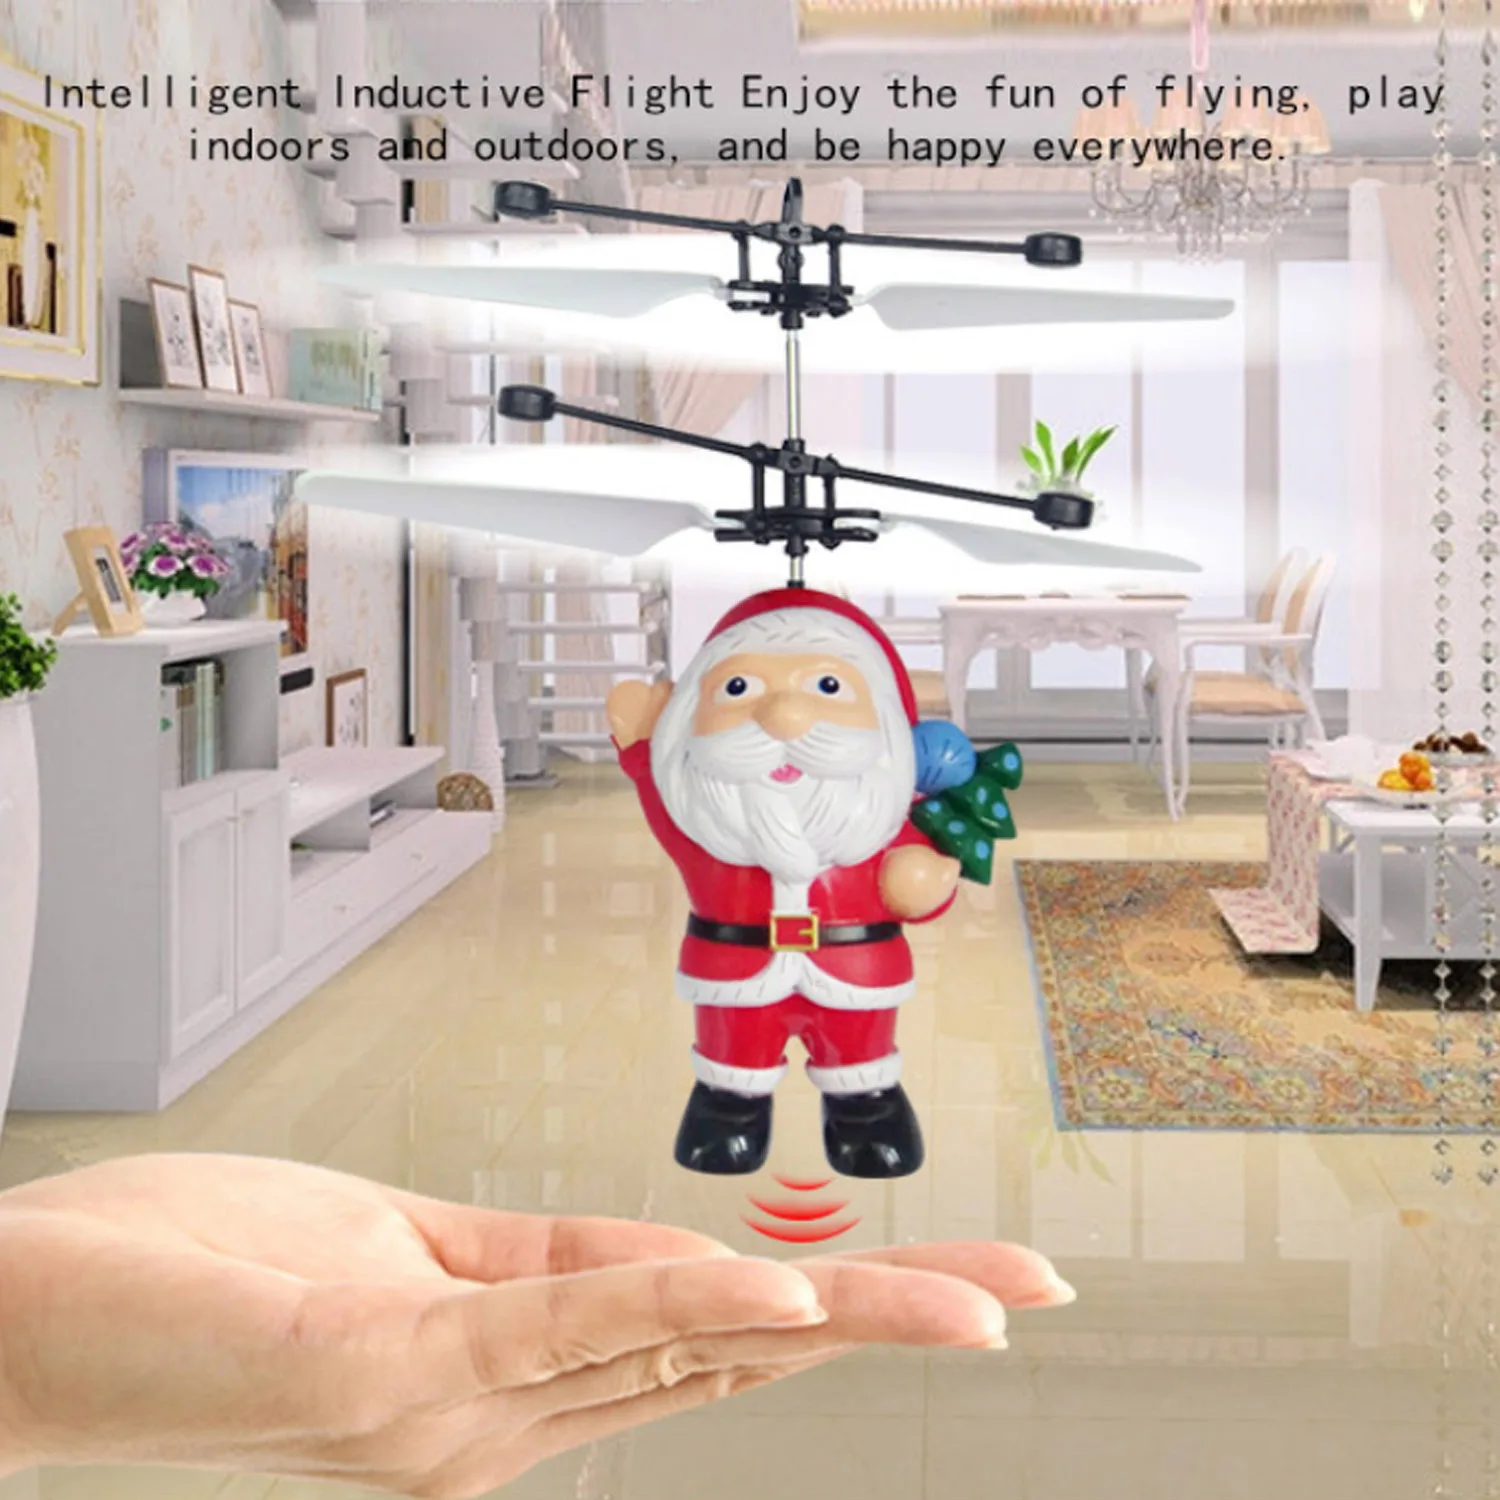 

Flying Inductive Mini RC Drone Christmas Santa Infrared Induction Flying Ball Aircraft Helicopter with LED Light Christmas Gifts